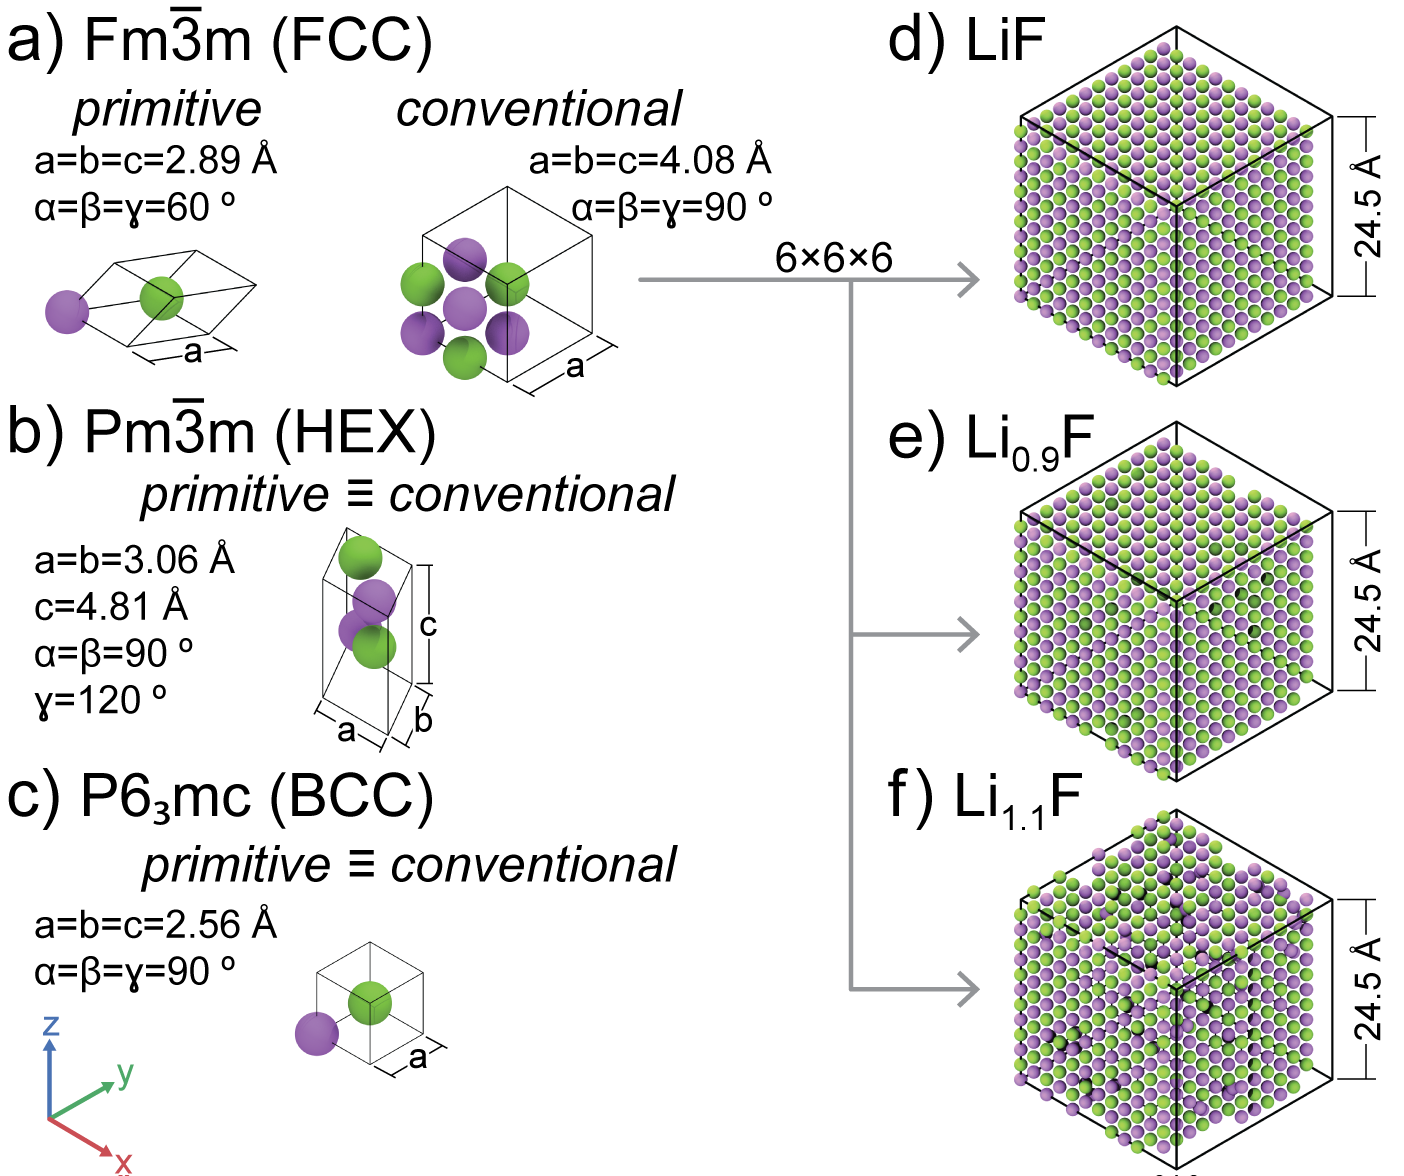 Enhancing ReaxFF for molecular dynamics simulations of lithium-ion batteries: an interactive reparameterization protocol